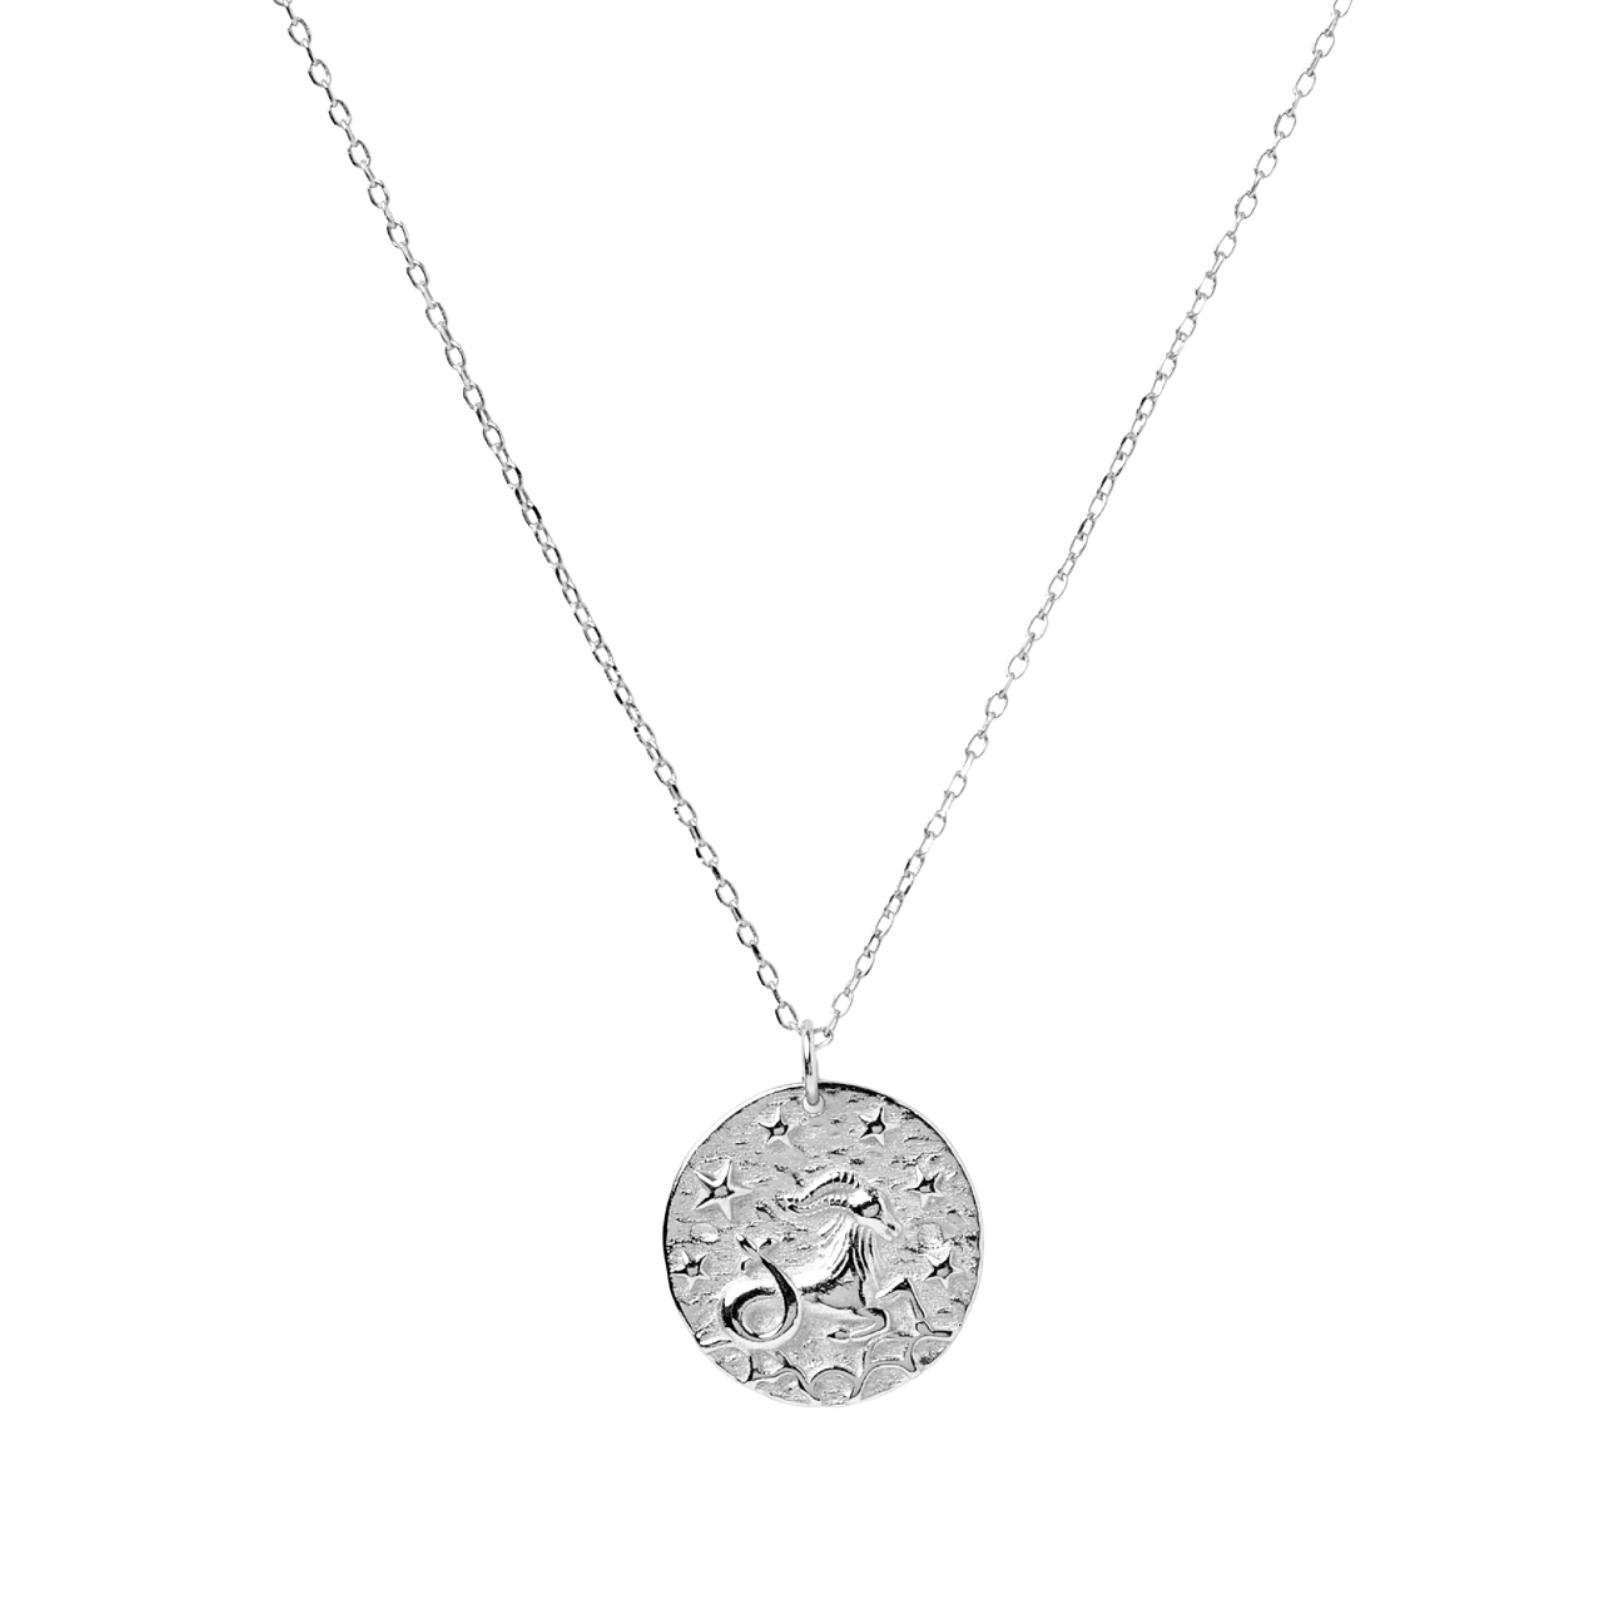 Capricorn - Star Sign Necklace